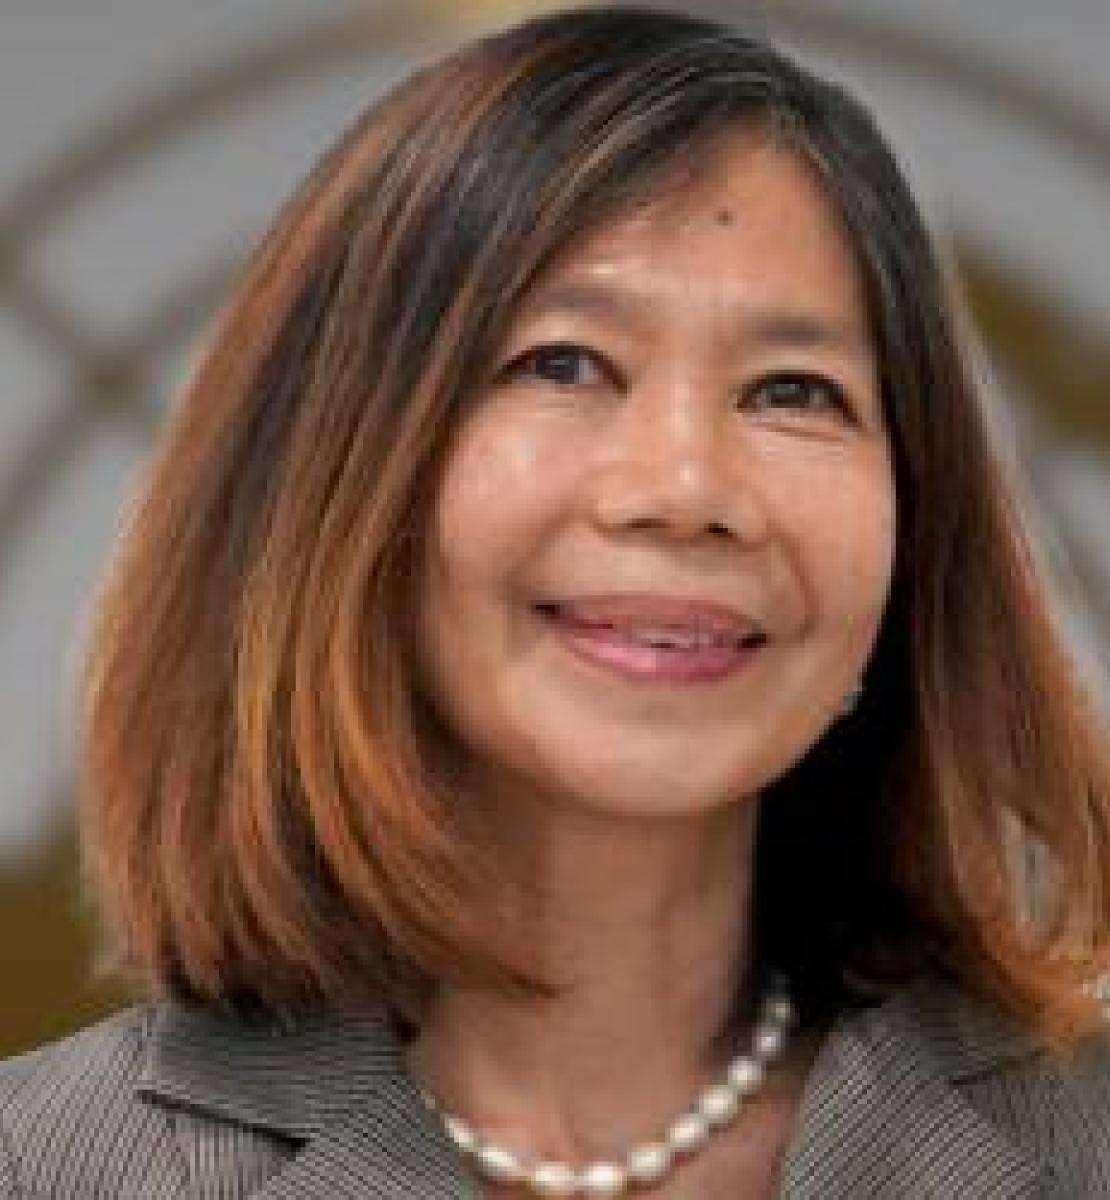 Secretary-General appoints Pauline Tamesis of the Philippines United Nations Resident Coordinator in Viet Nam